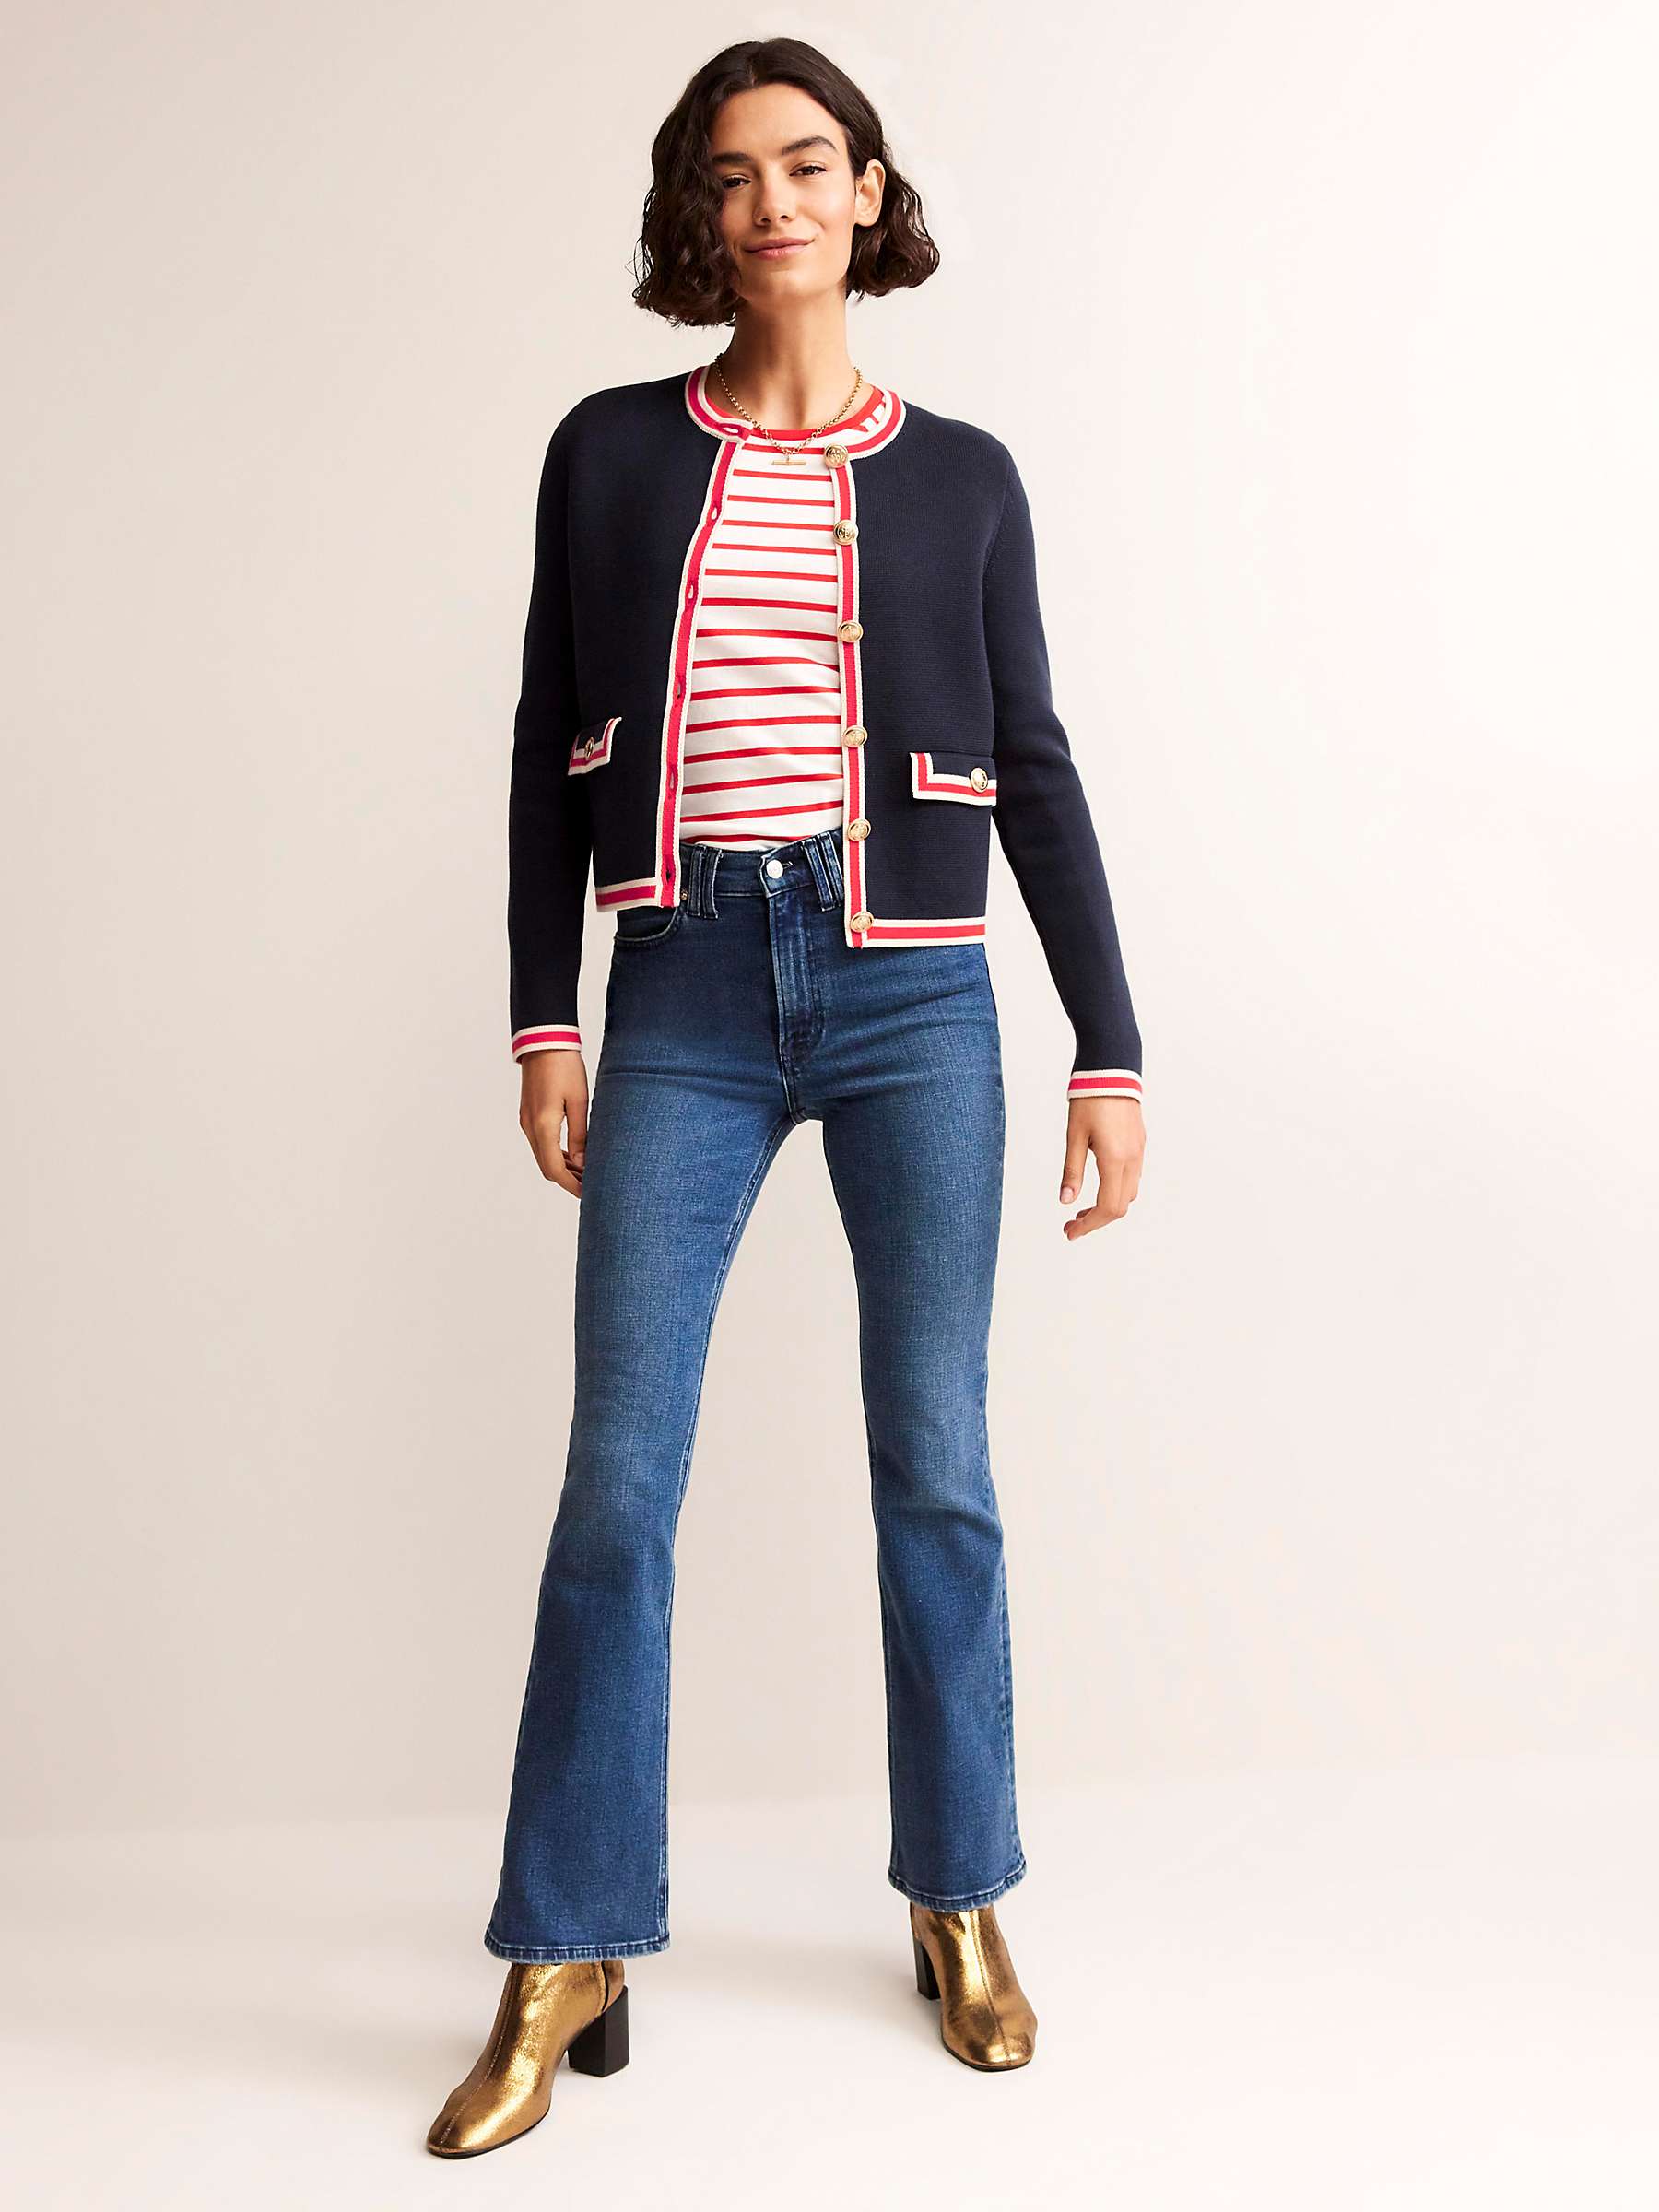 Buy Boden Holly Cropped Knitted Jacket, Navy/Multi Online at johnlewis.com